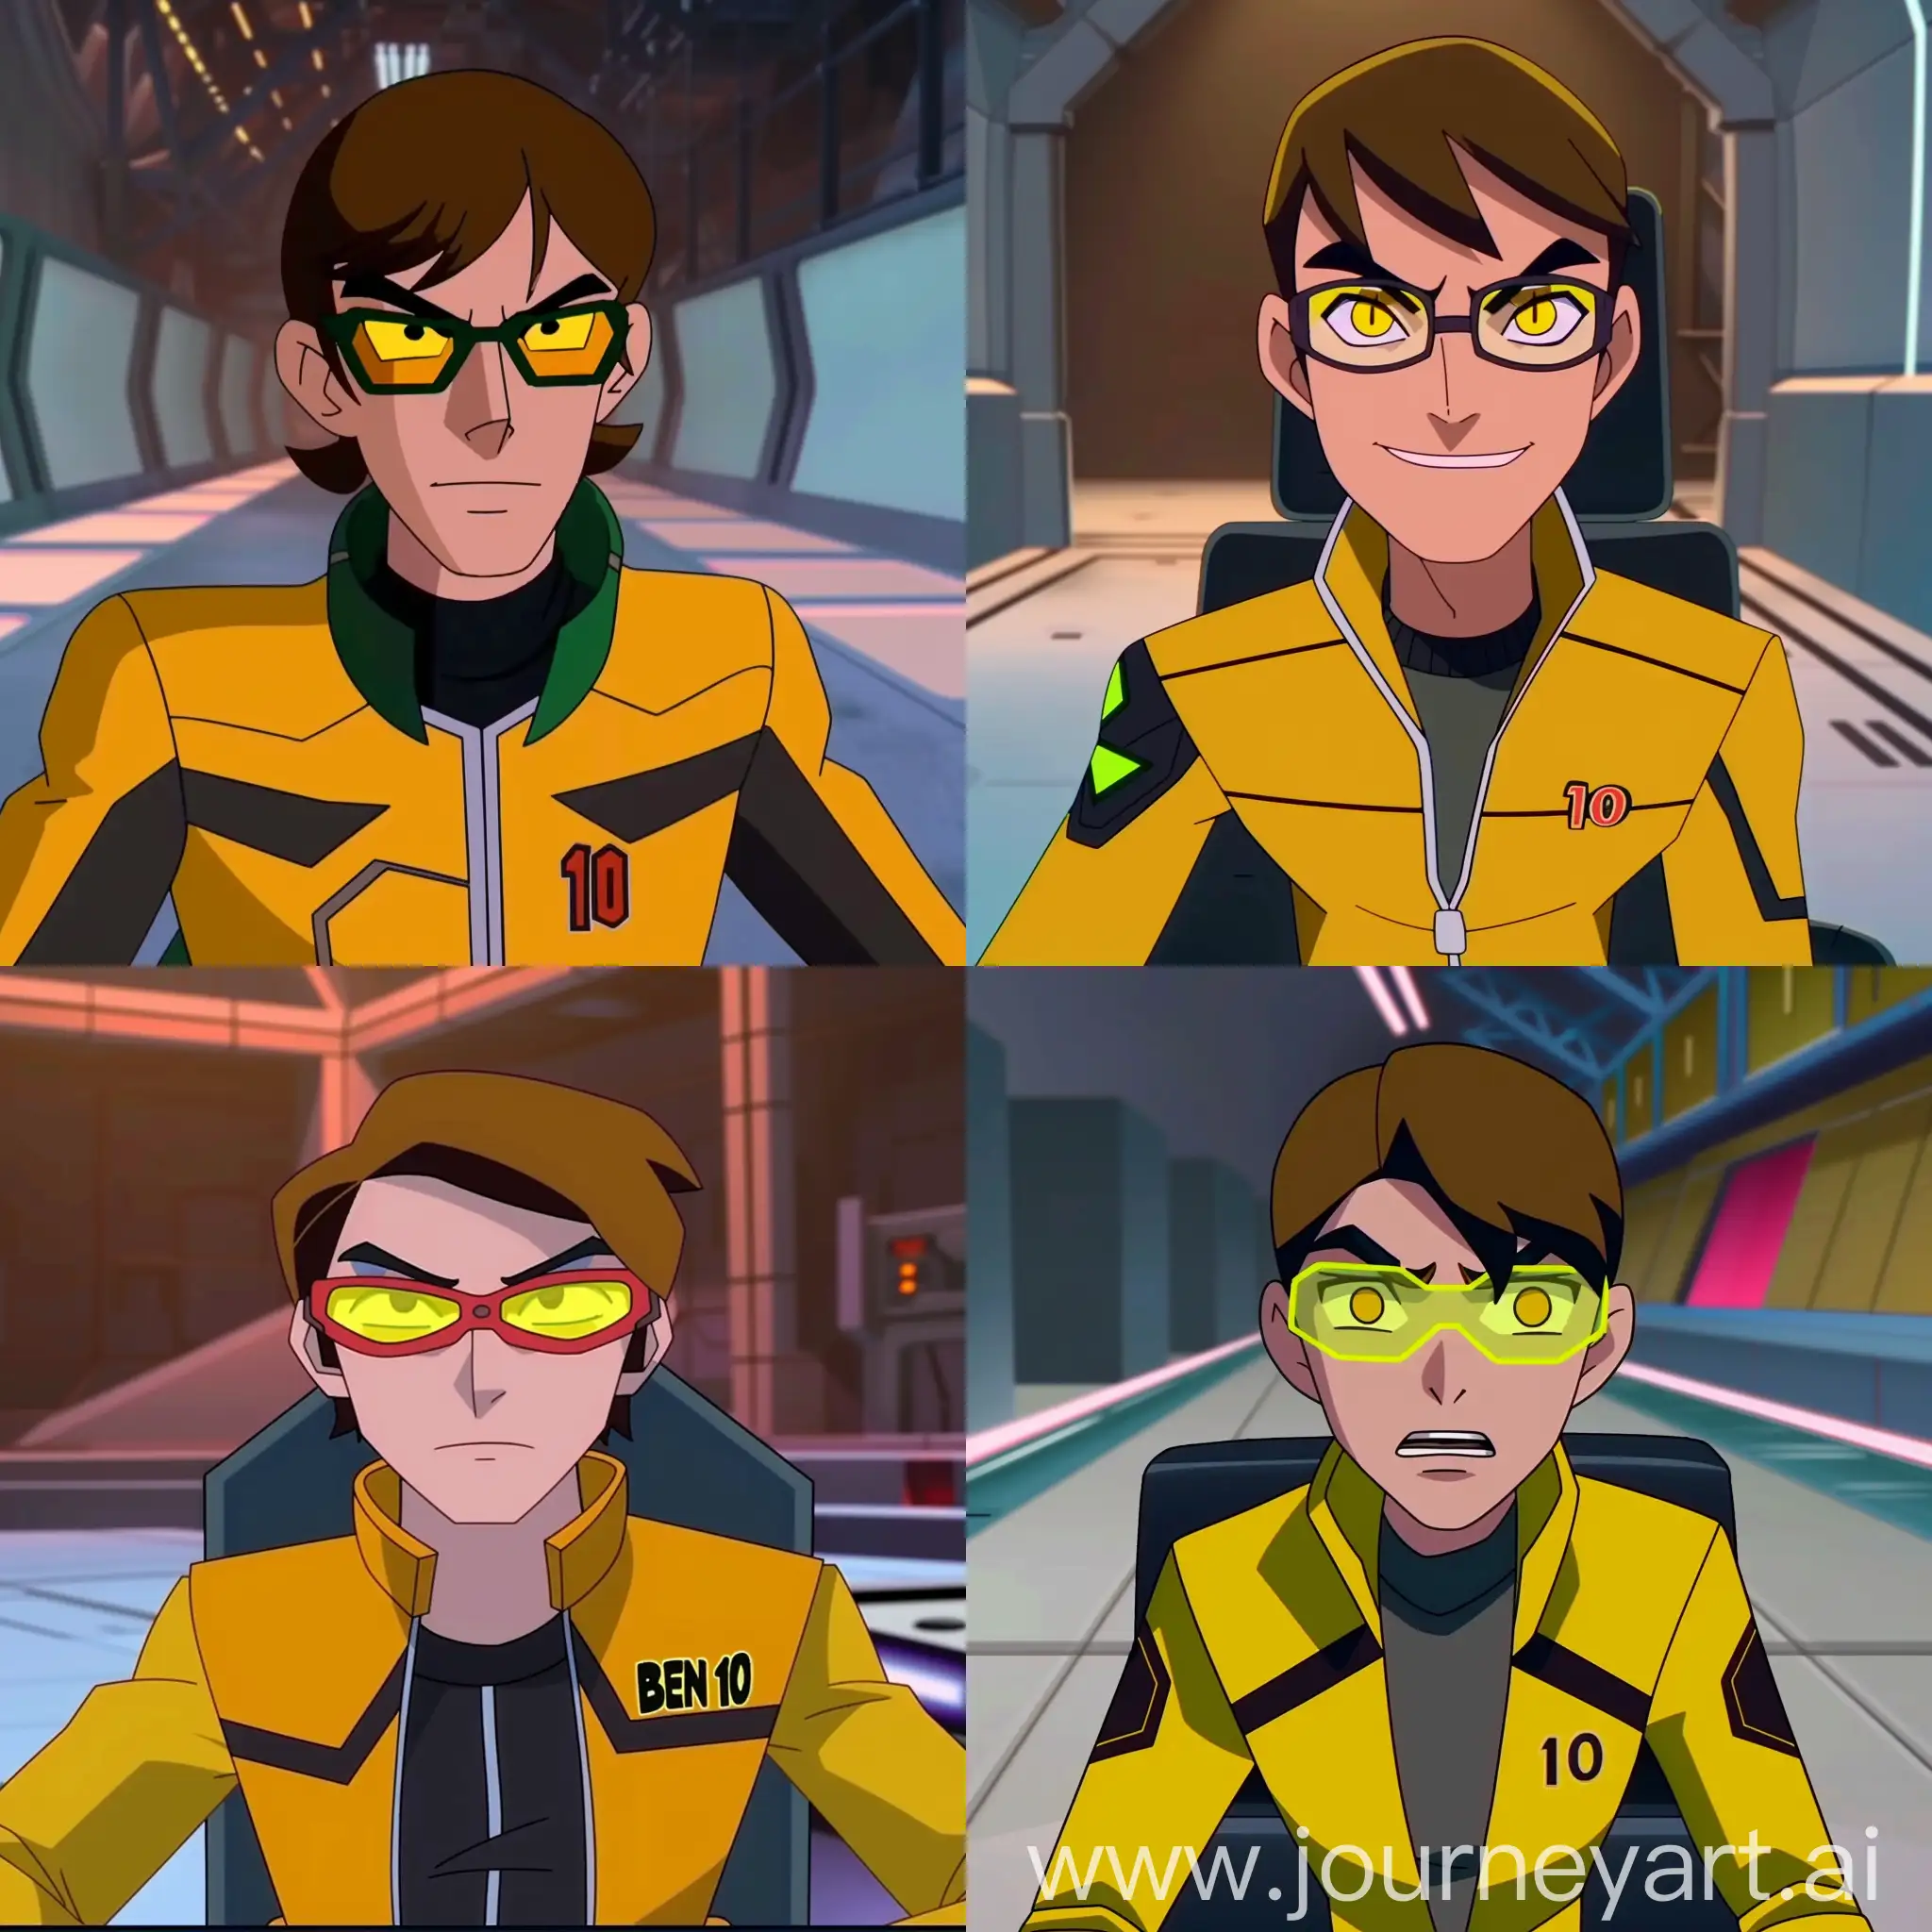 he's an animated character in the style of Man of Action[ben 10], he's handsome and has curved jawline, he is 5'11 in height and 60kg in weight. he wearing party glasses and he has yellow eyes, still is captured from front straight angle and it's a close camera shot with him smirking a little and "ben 10" is embroidered on his yellow jacket and black sweatshirt underneath. he's sitting on the empty hollow space with dim blur aesthetic background, portrait style,  --v 6  --sref https://cdn.discordapp.com/attachments/1215979386310889605/1216982884083040266/Picsart_24-03-08_22-57-05-471.jpg?ex=66025ea2&is=65efe9a2&hm=a3c3cd11df6f7a445bf1bb038220edc722e23bafed0277ddb6c2189fdd7132ea& <https://cdn.discordapp.com/attachments/1215979386310889605/1217016024080191539/dc0ea46ef4800245c6852fecdca3ec26.jpg?ex=66027d7f&is=65f0087f&hm=4dfeeb9c50c293884950e8ce0d8b37869a4a50faa0b9dc9468d263f56d640be5&> --sw 90